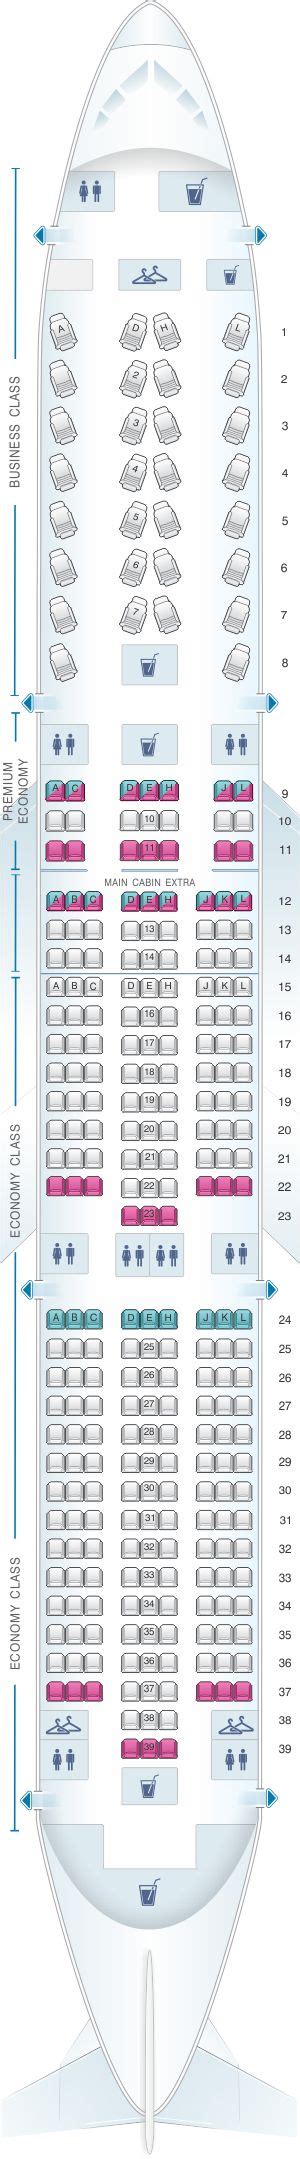 Seat Map American Airlines Boeing B787 9 Asiana Airlines American